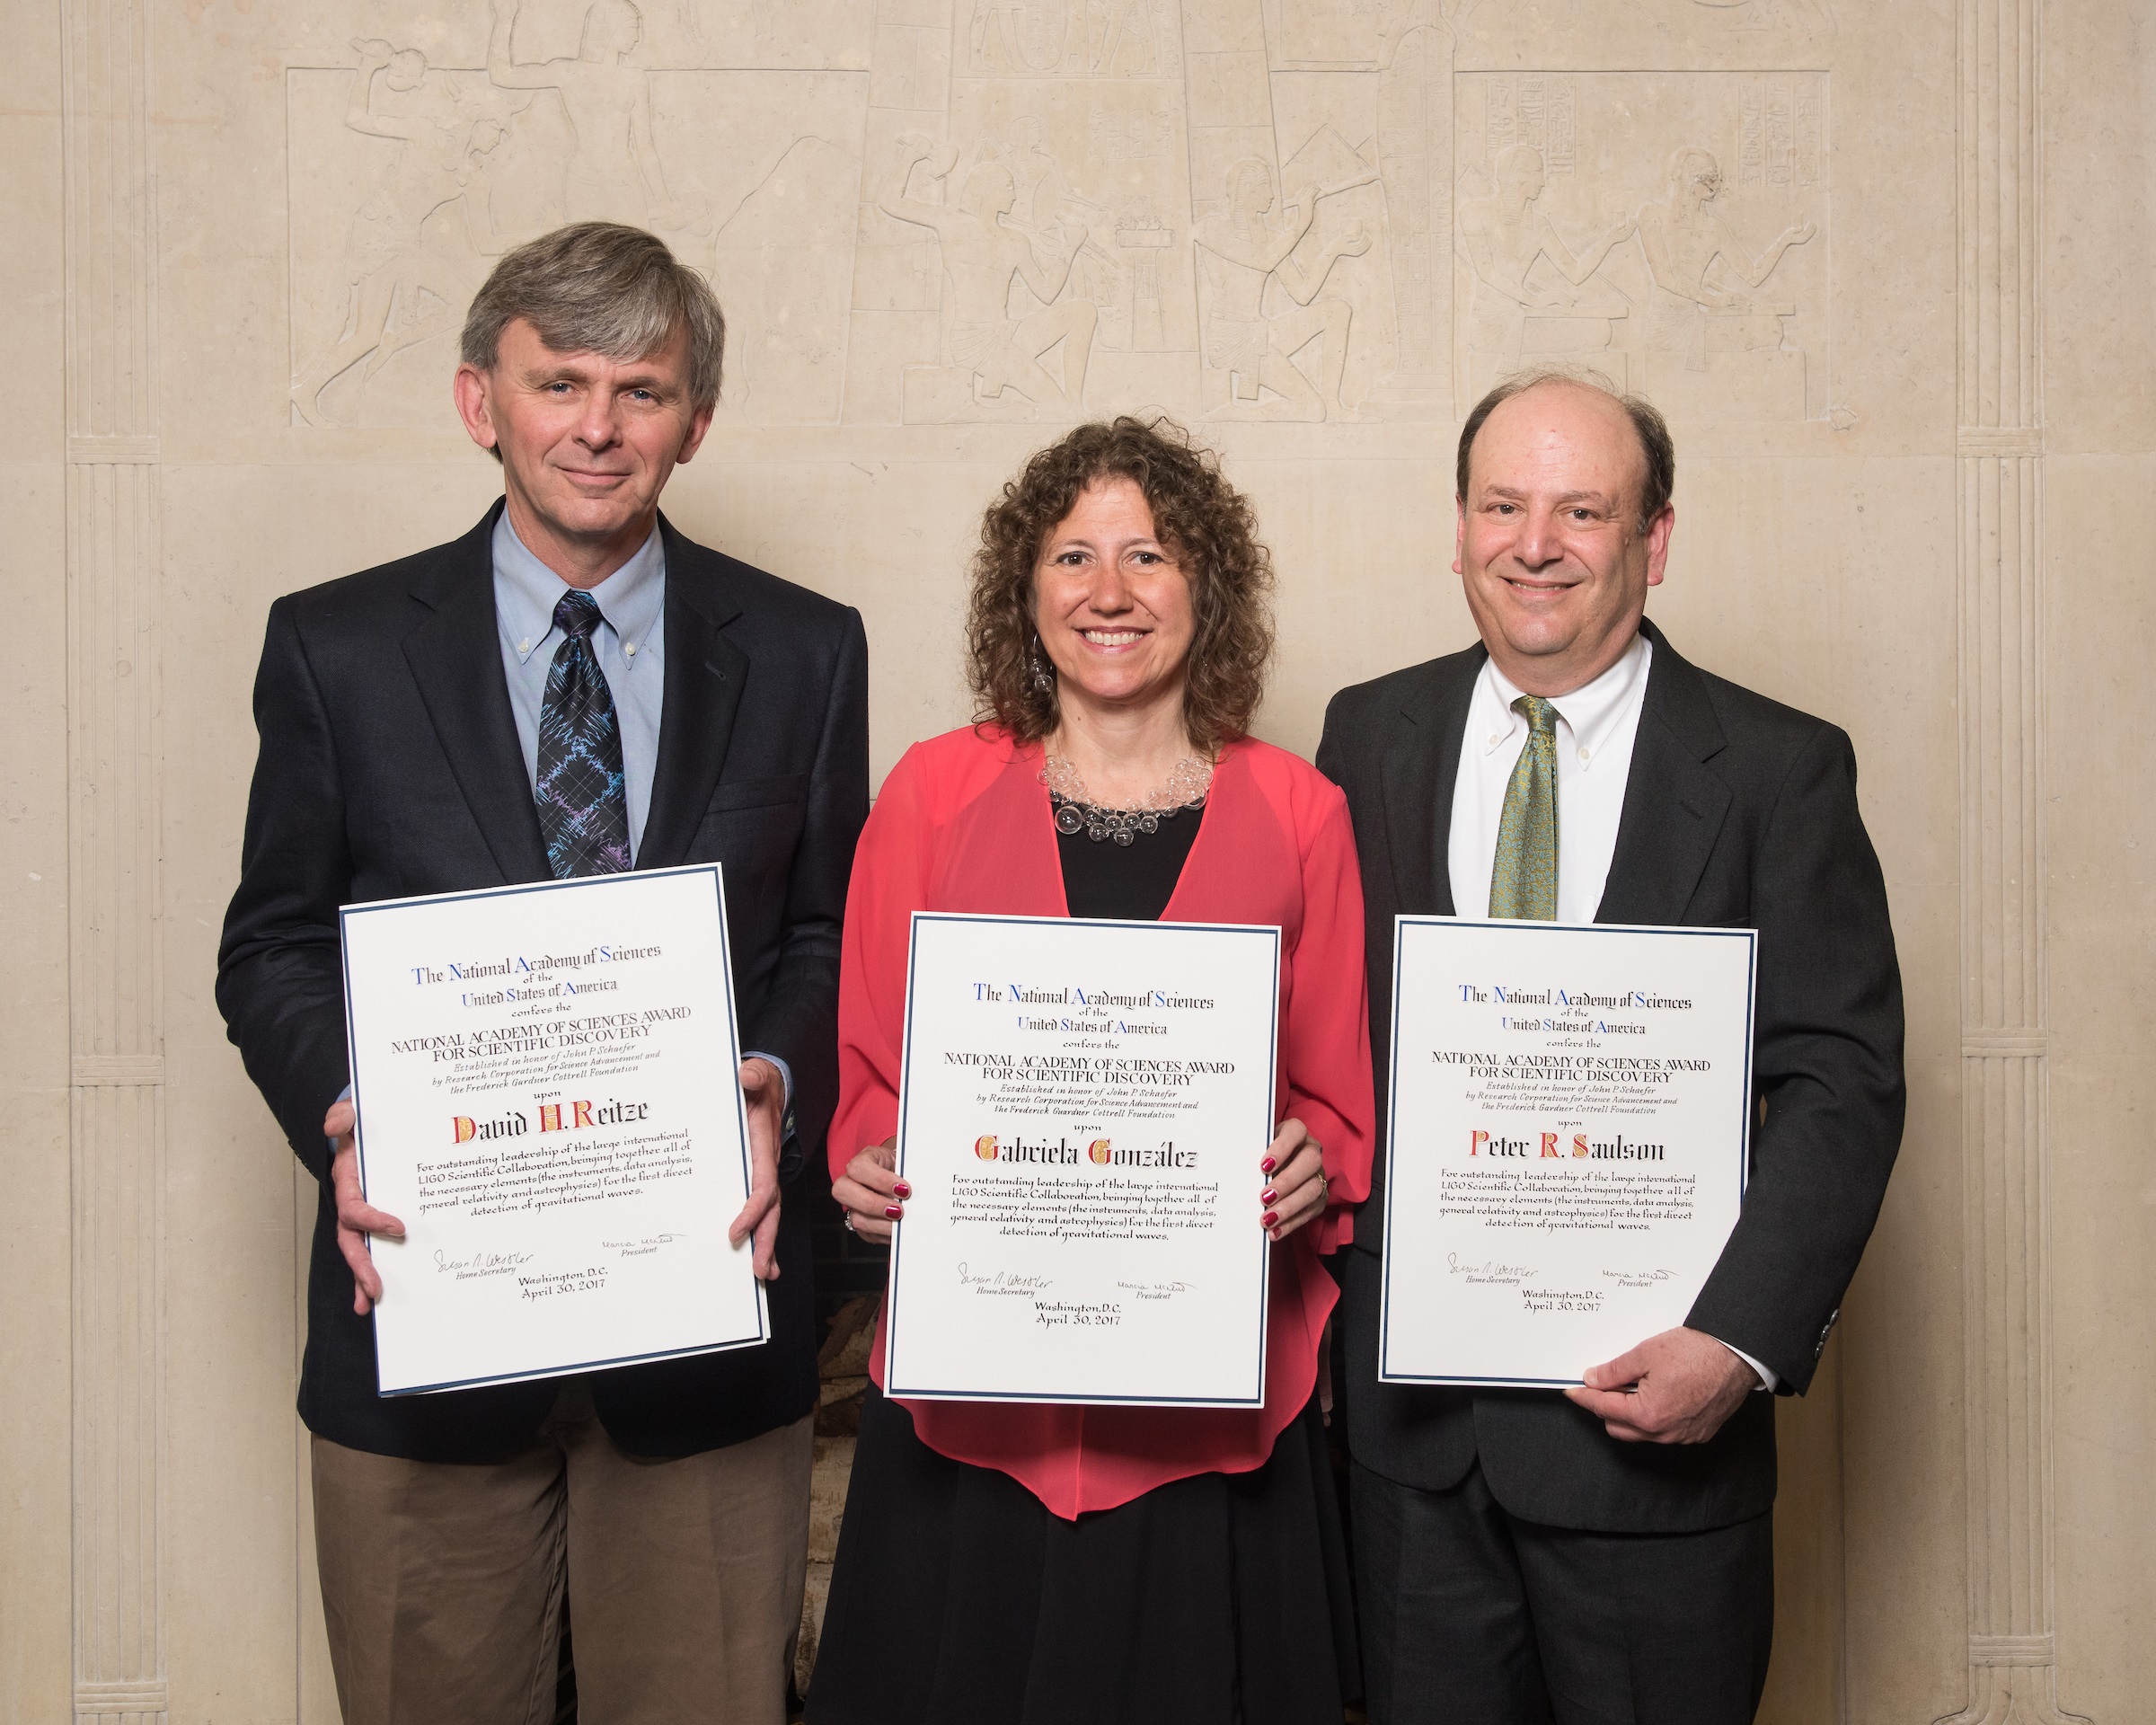 National Academy of Sciences Award for Scientific Discovery